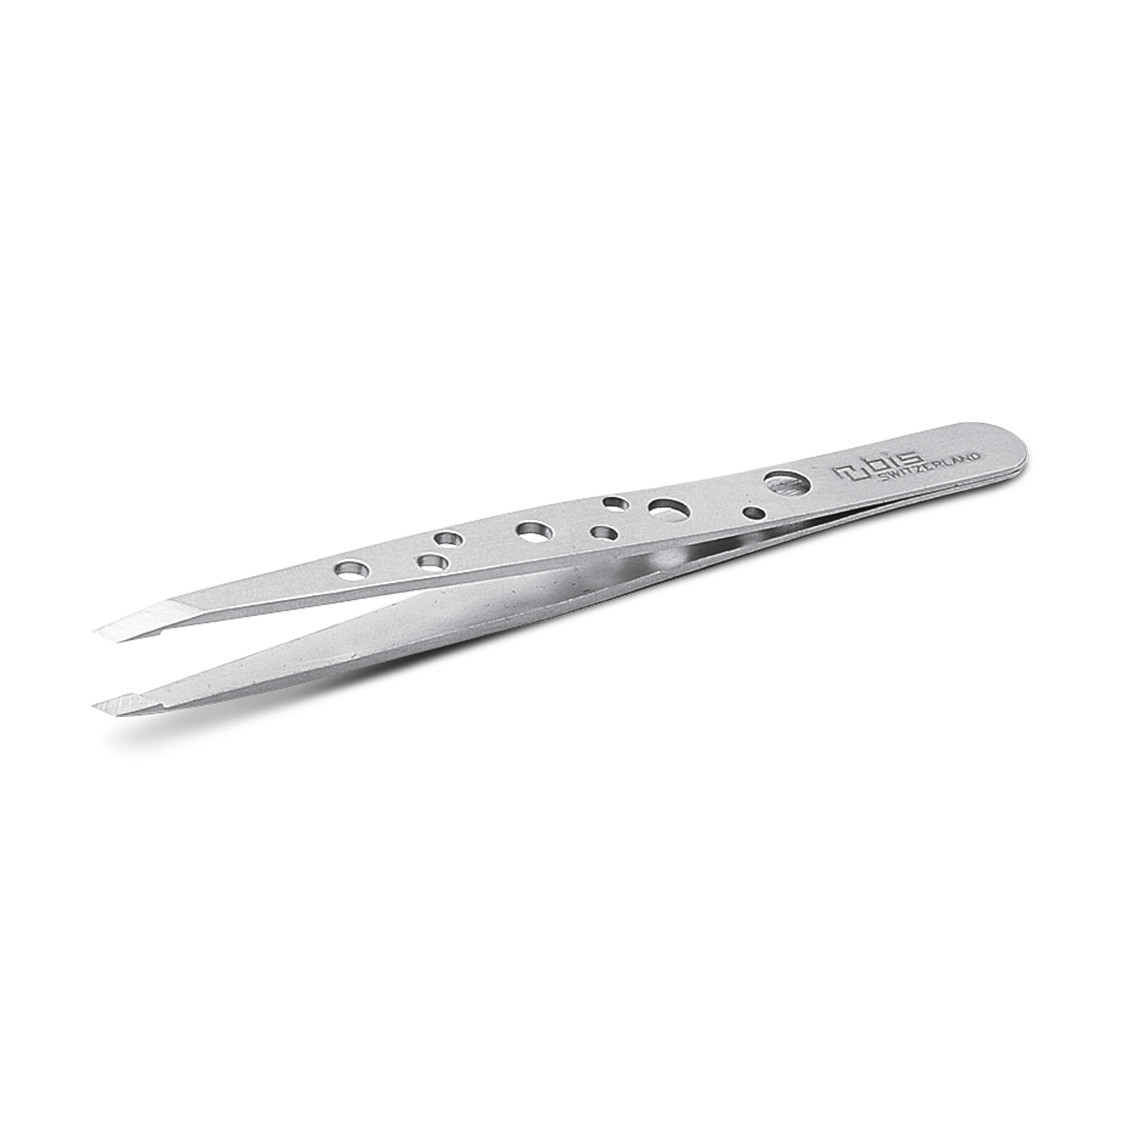 Rubis professional eyebrow tweezers in stainless steel, perforated with oblique tip